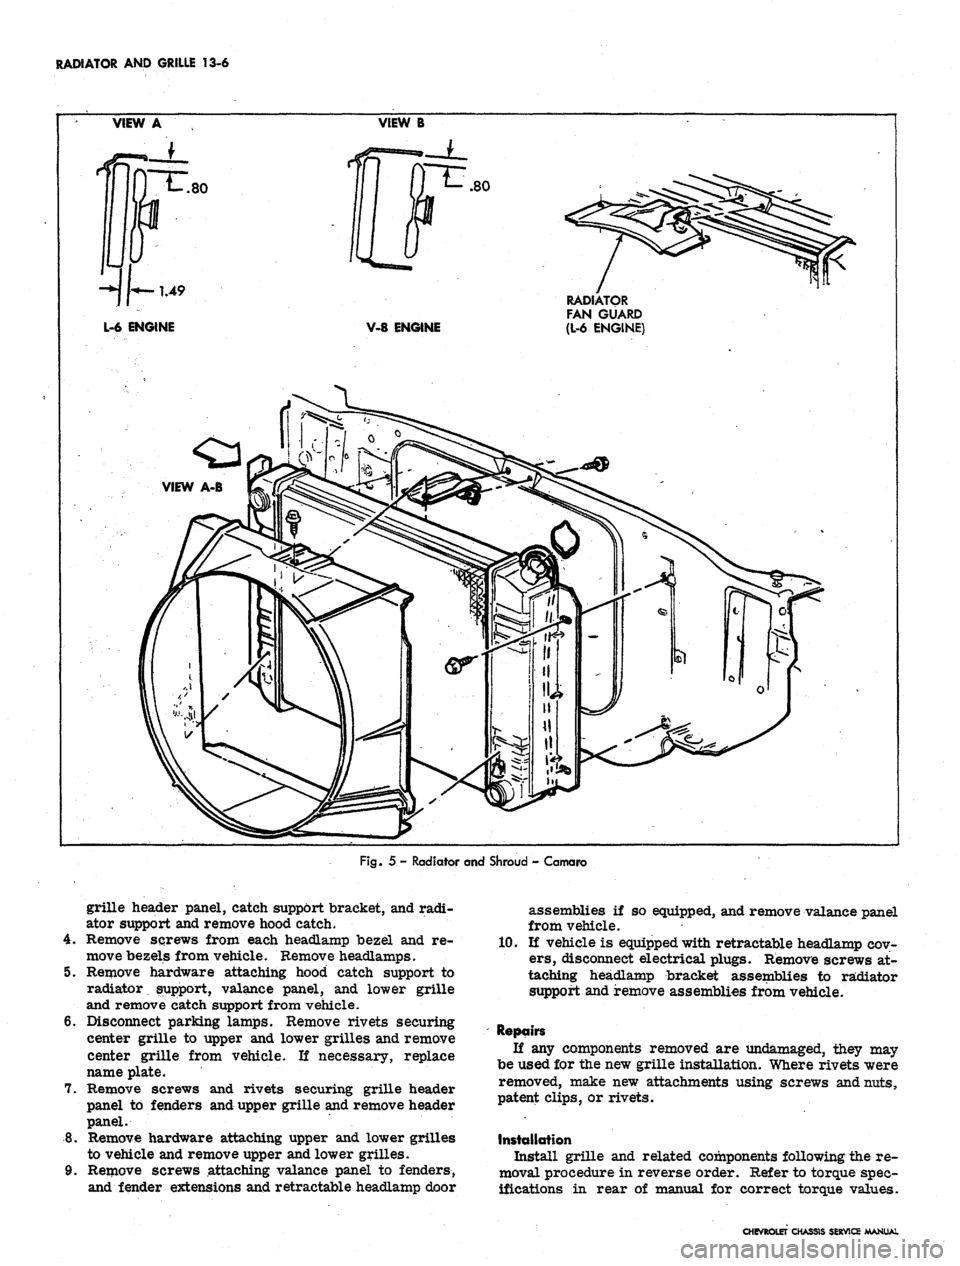 CHEVROLET CAMARO 1967 1.G Chassis Workshop Manual 
RADIATOR AND GRILLE 13-6

VIEW A 
VIEW B

V-8 ENGINE 
RADIATOR

FAN GUARD

(L-6 ENGINE)

VIEW

Fig.
 5 - Radiator and Shroud - Camaro

grille header panel, catch support bracket, and radi-

ator supp